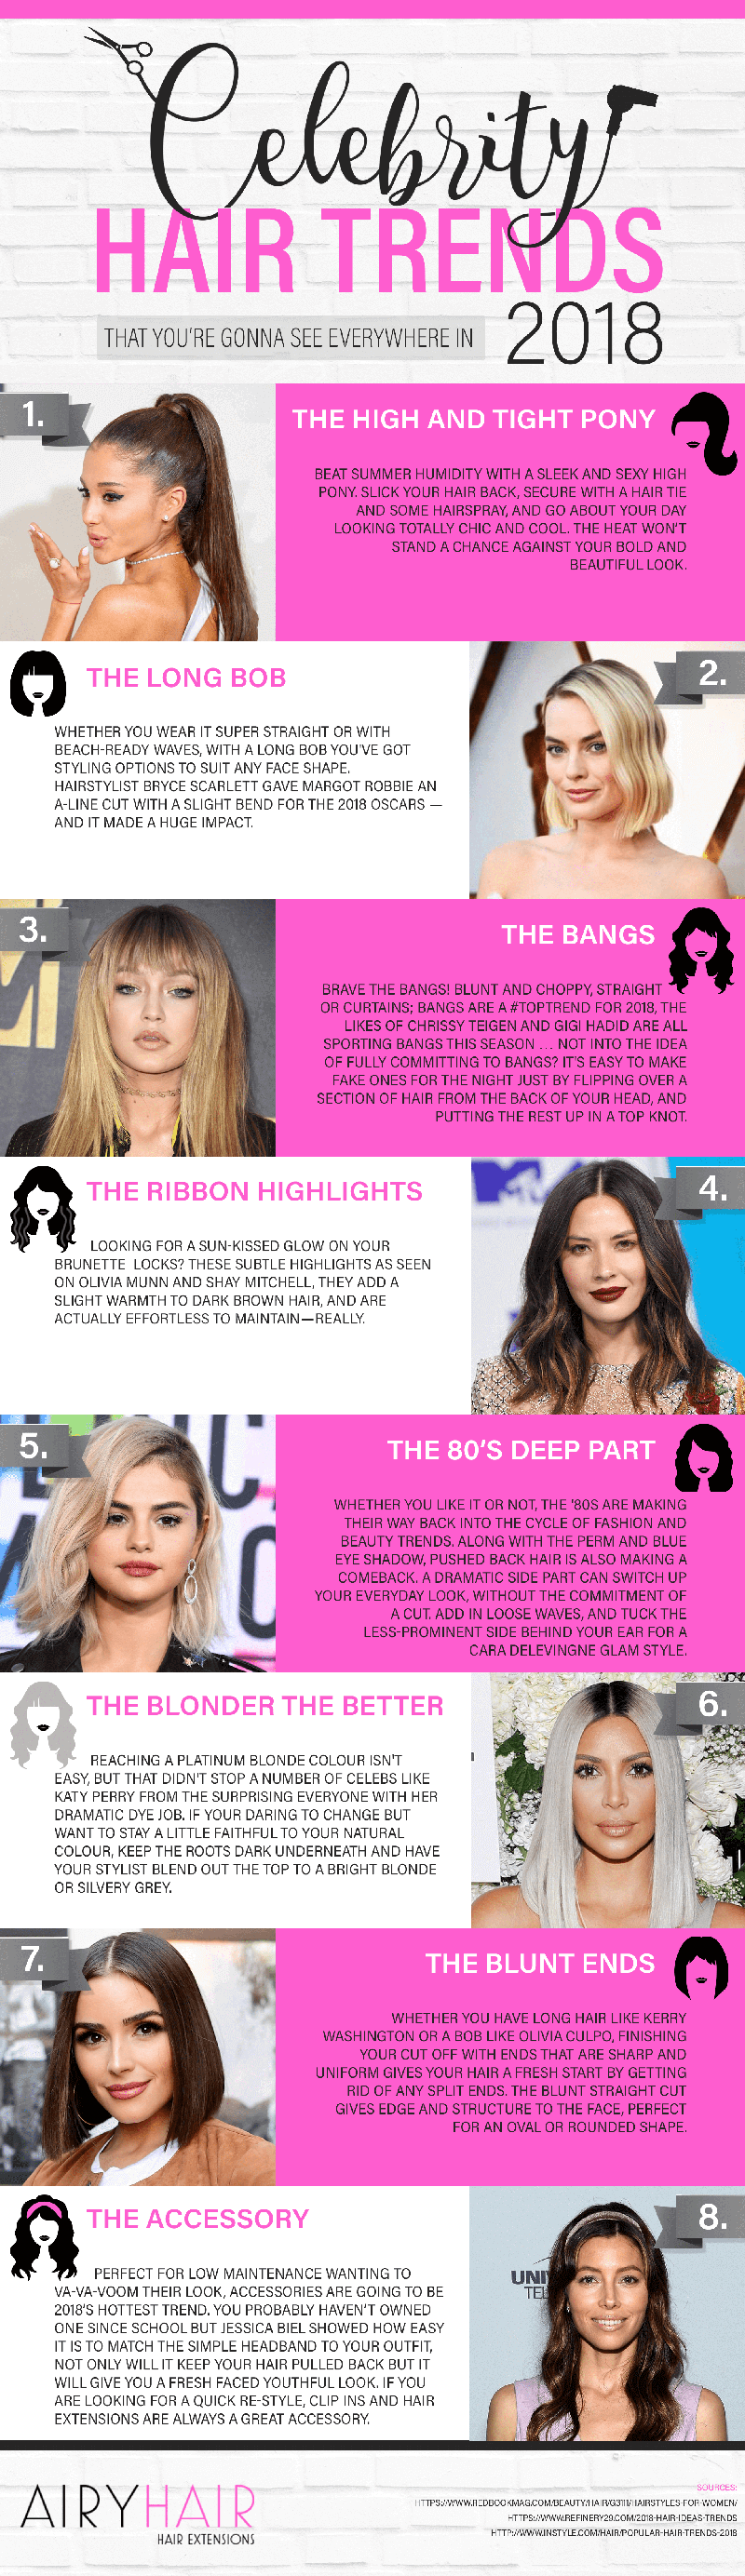 The Celebrity Hair Trends